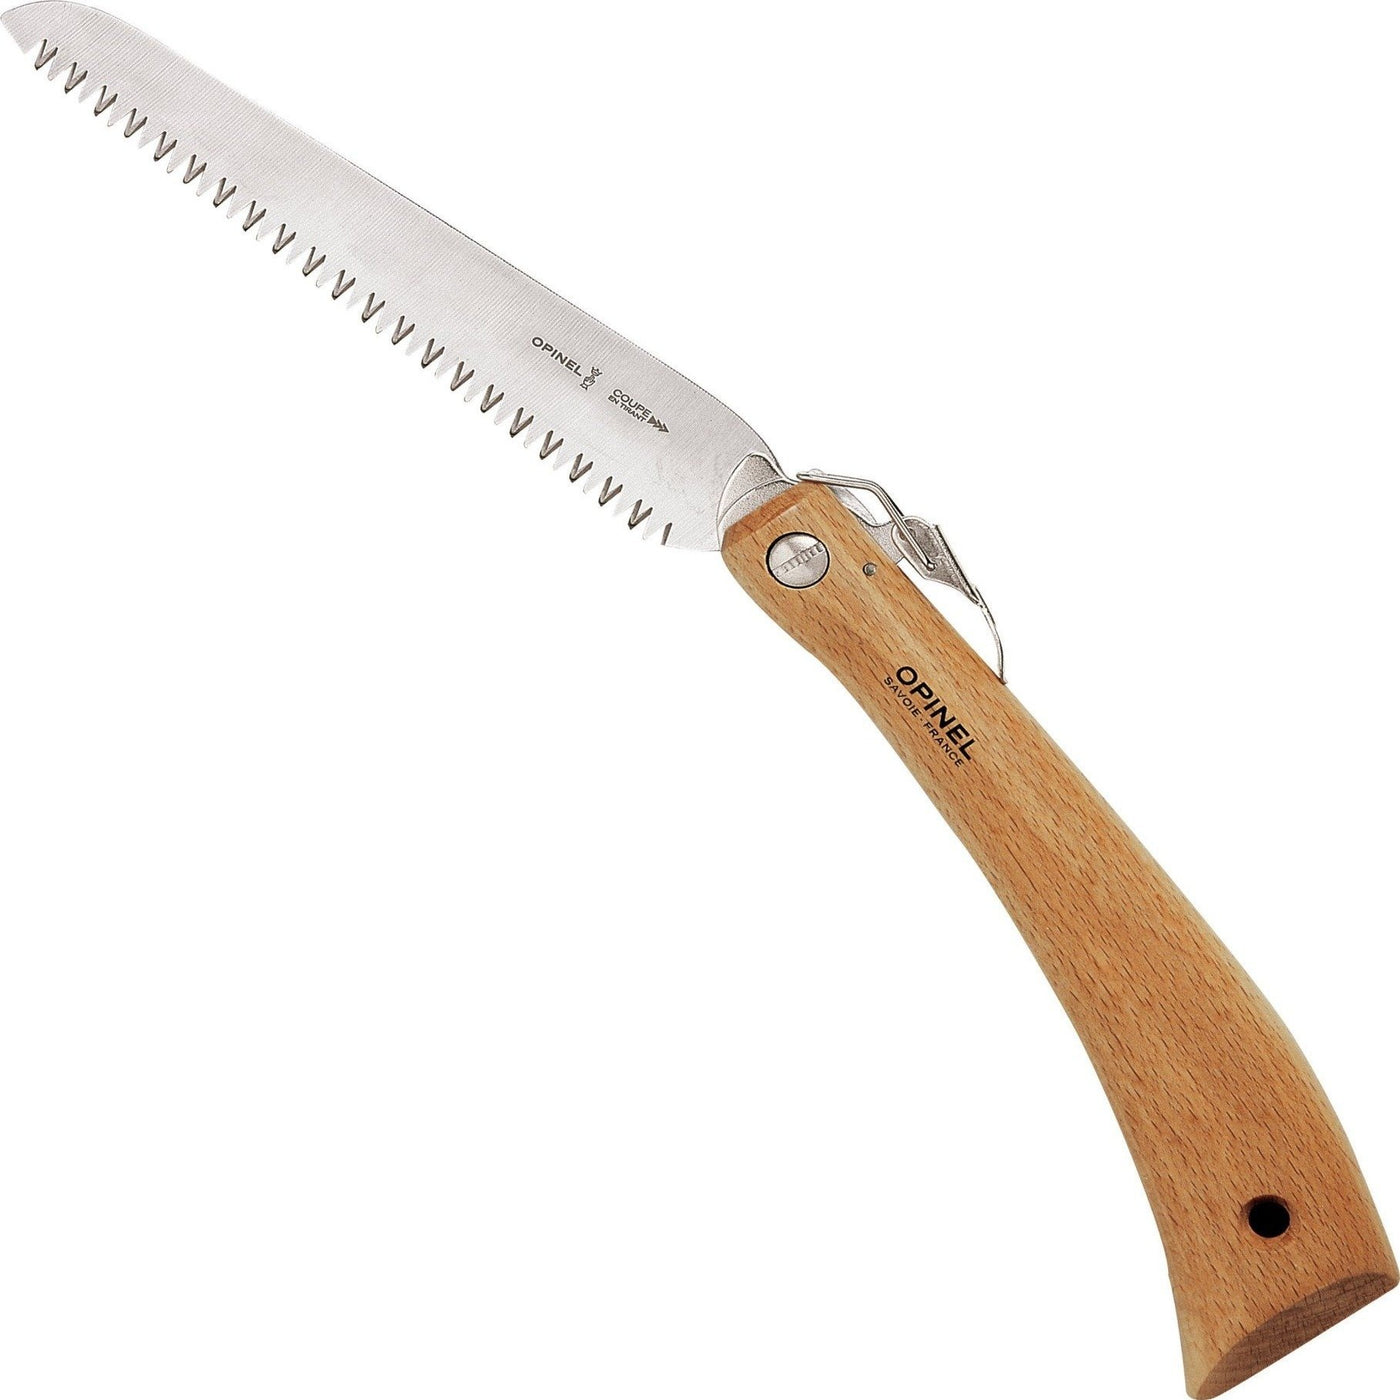 No.18 Carbon Steel Opinel Saw